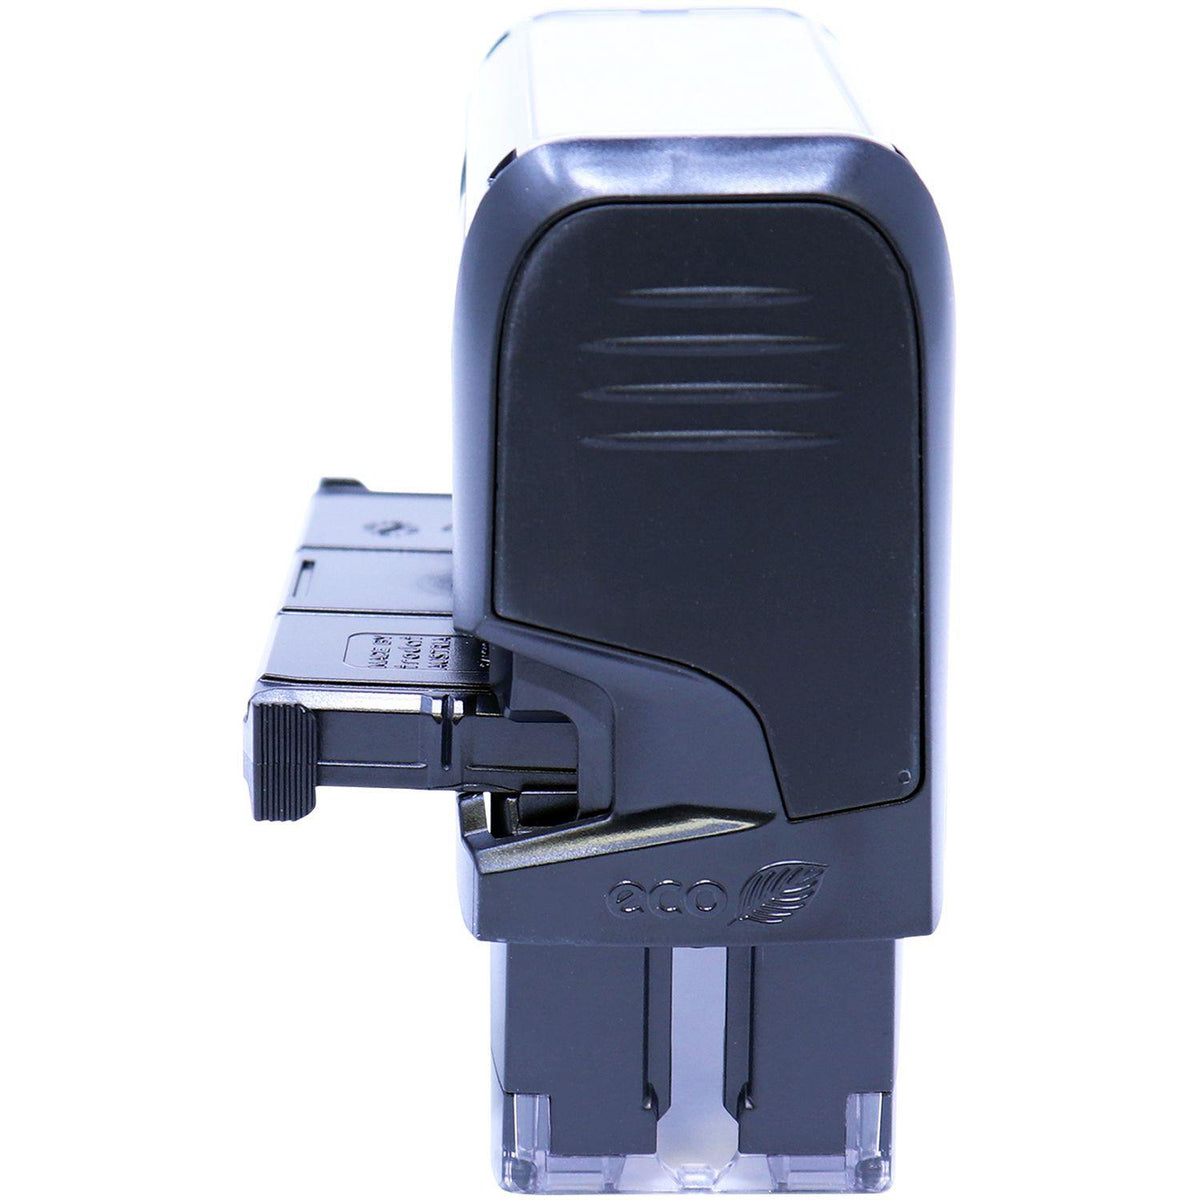 Self-Inking Fax Stamp Stamp - Engineer Seal Stamps - Brand_Trodat, Impression Size_Small, Stamp Type_Self-Inking Stamp, Type of Use_Business, Type of Use_Office, Type of Use_Professional